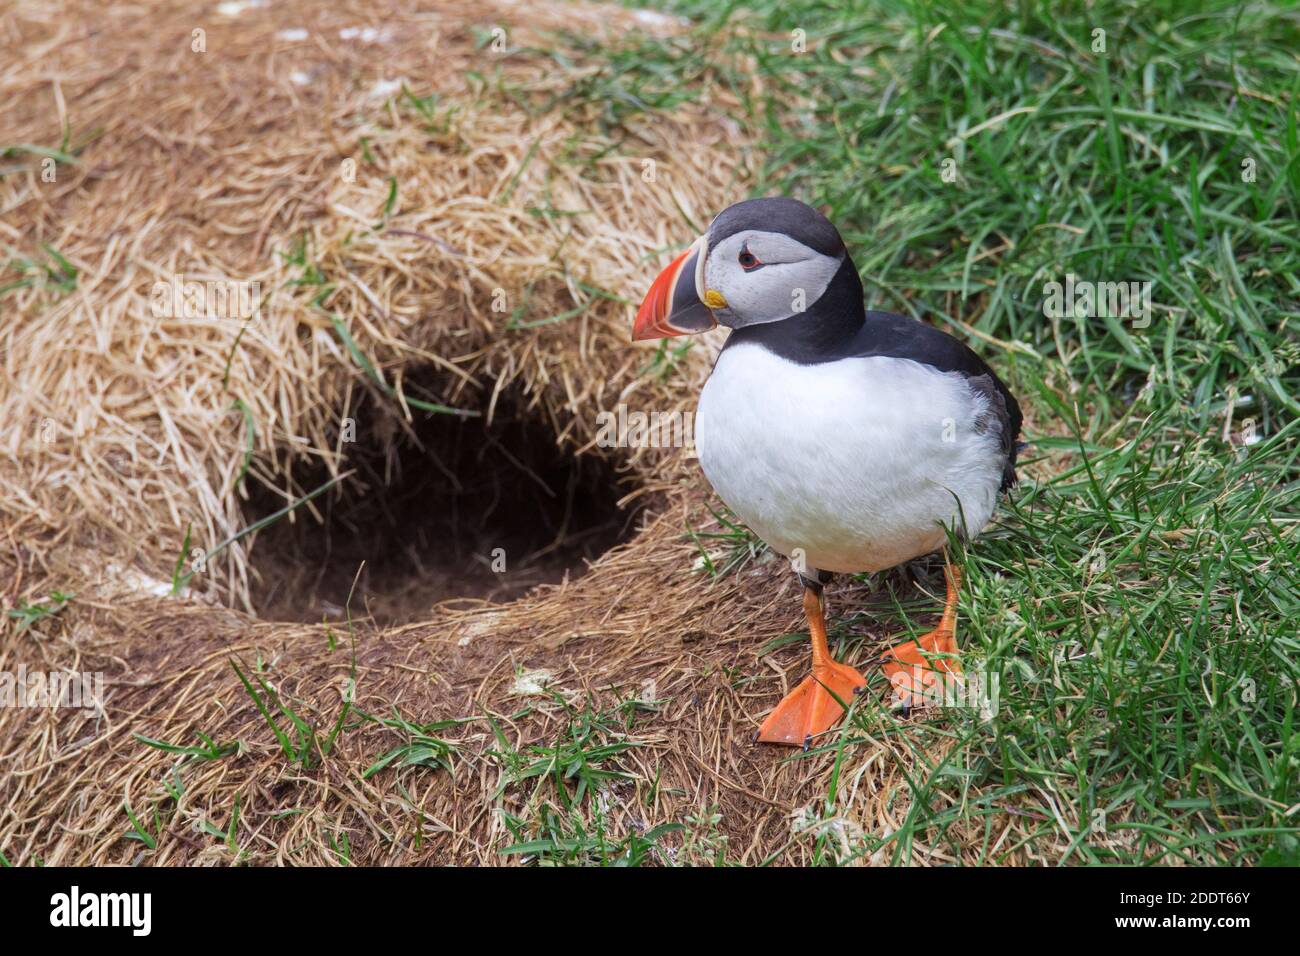 Atlantic puffin (Fratercula arctica) at burrow entrance of old rabbit hole on sea cliff top in seabird colony in summer Stock Photo